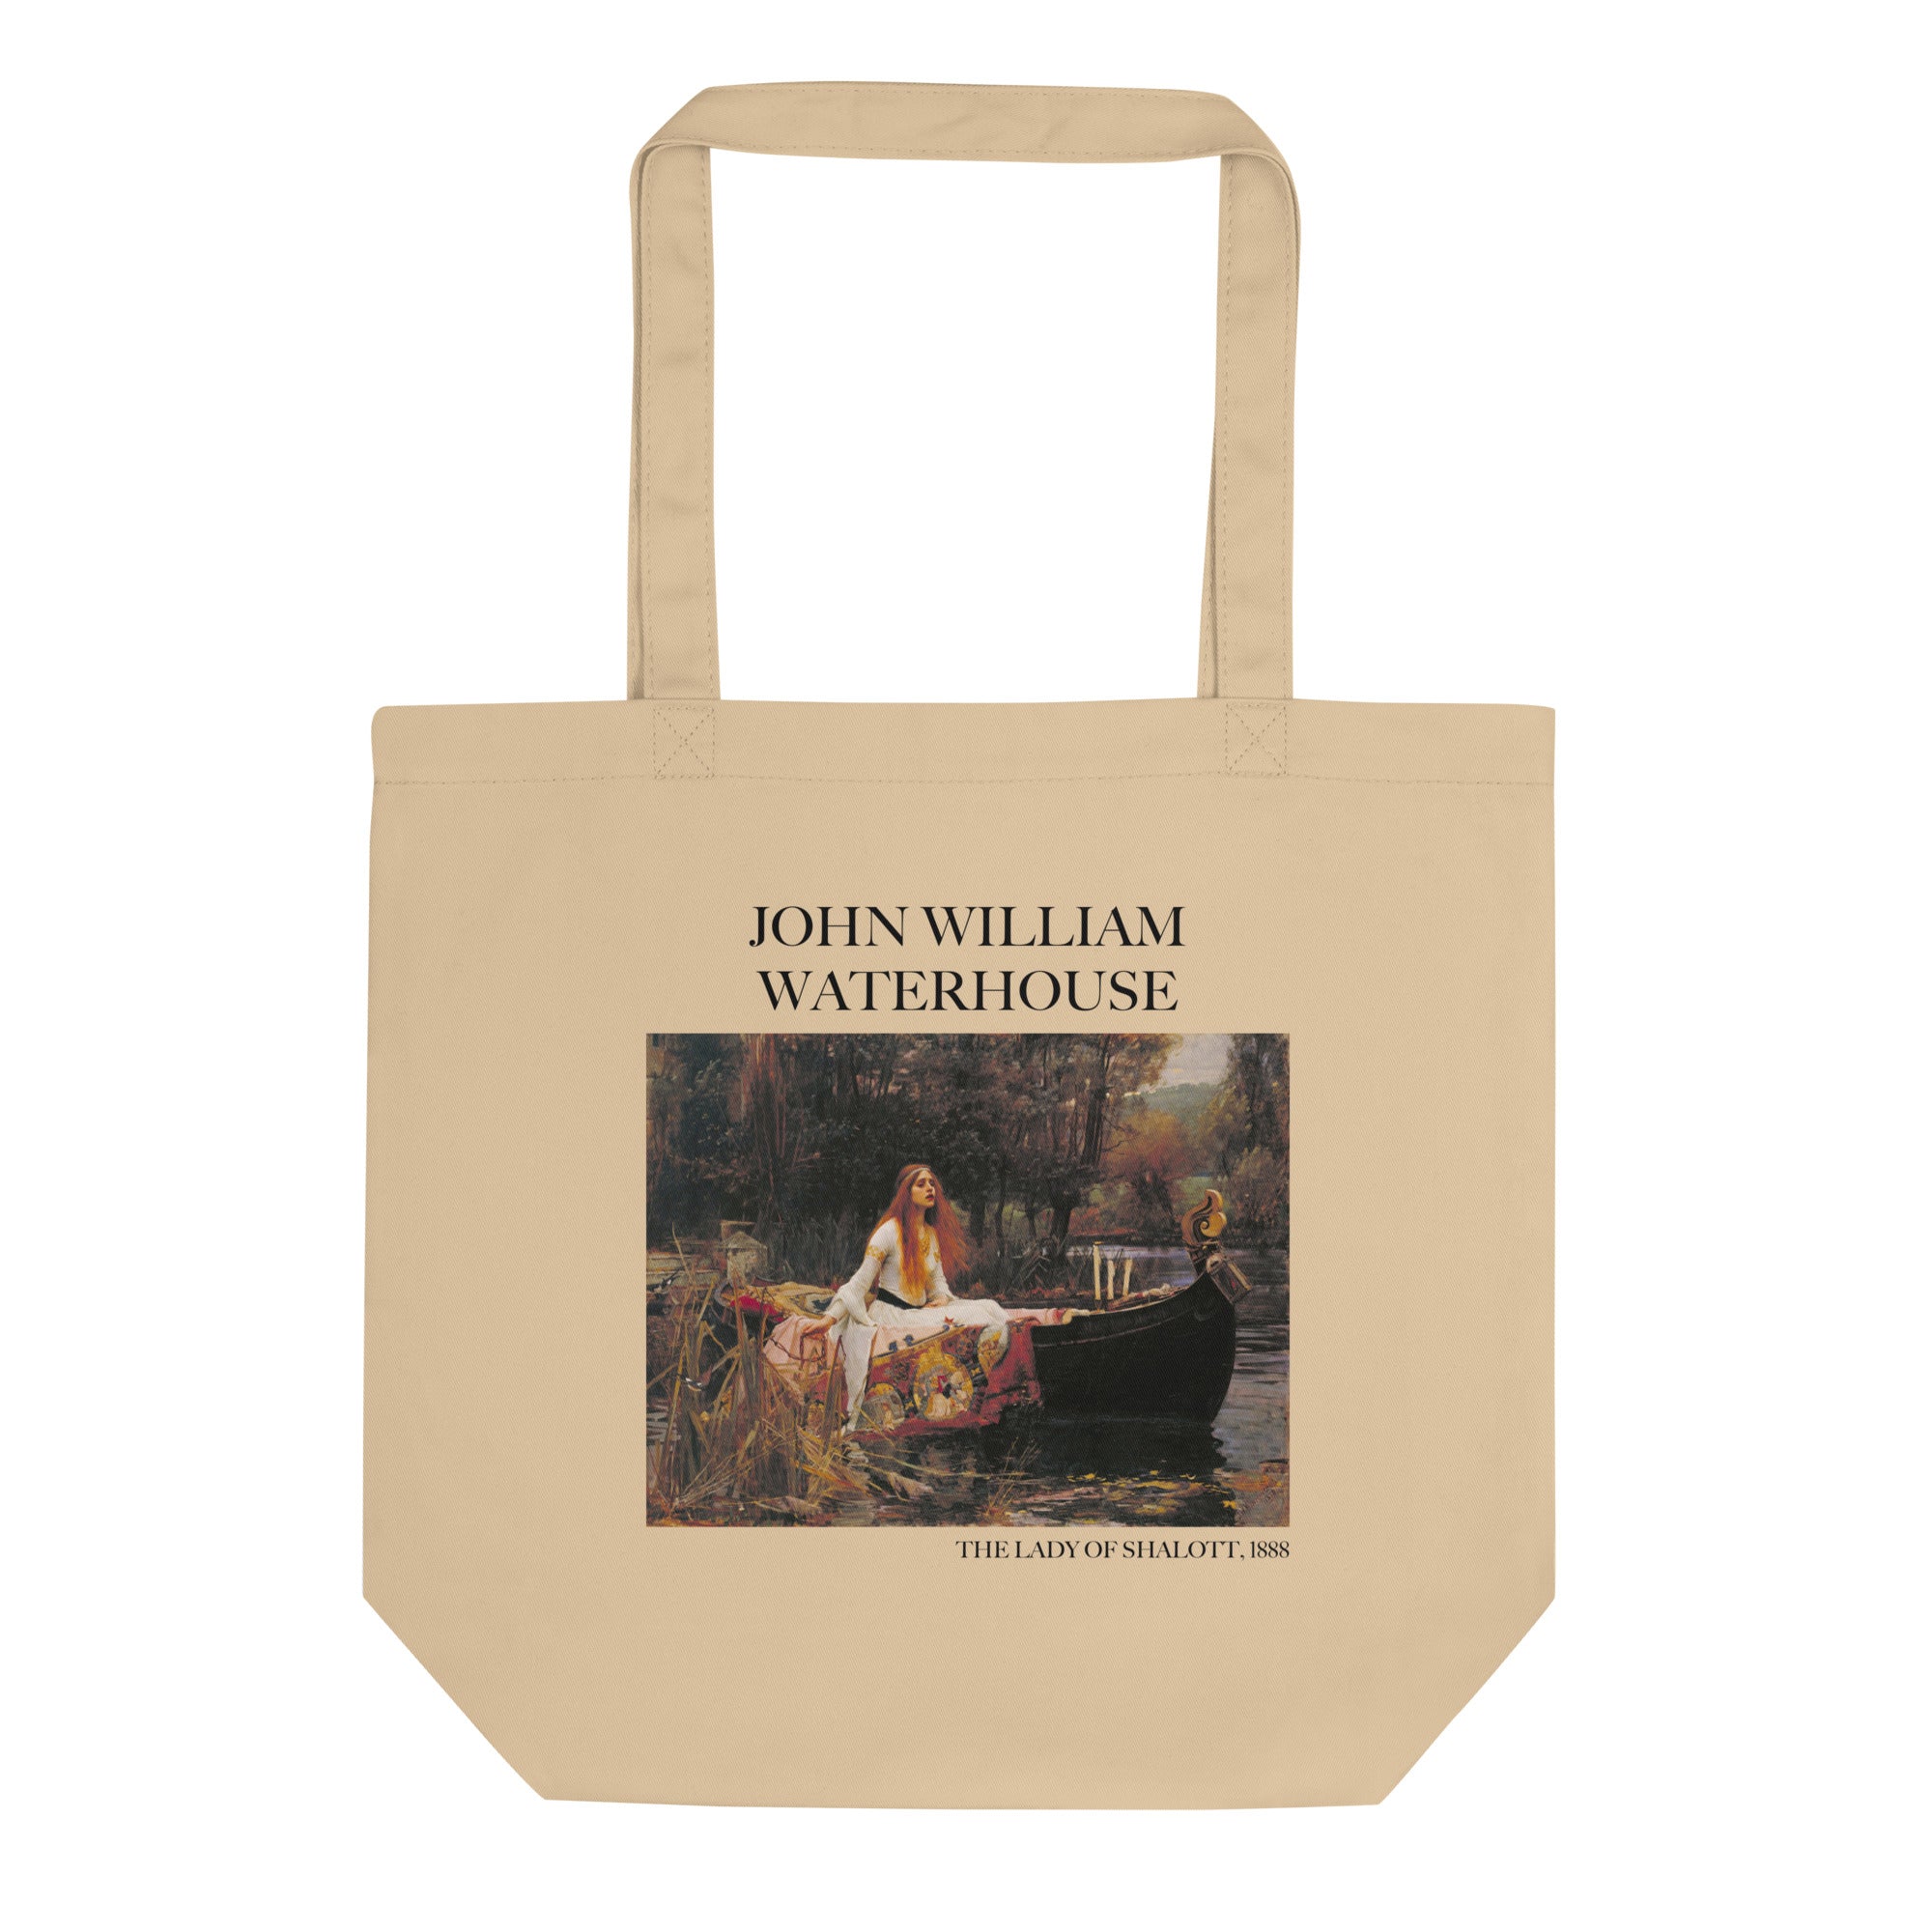 John William Waterhouse 'The Lady of Shalott' Famous Painting Totebag | Eco Friendly Art Tote Bag